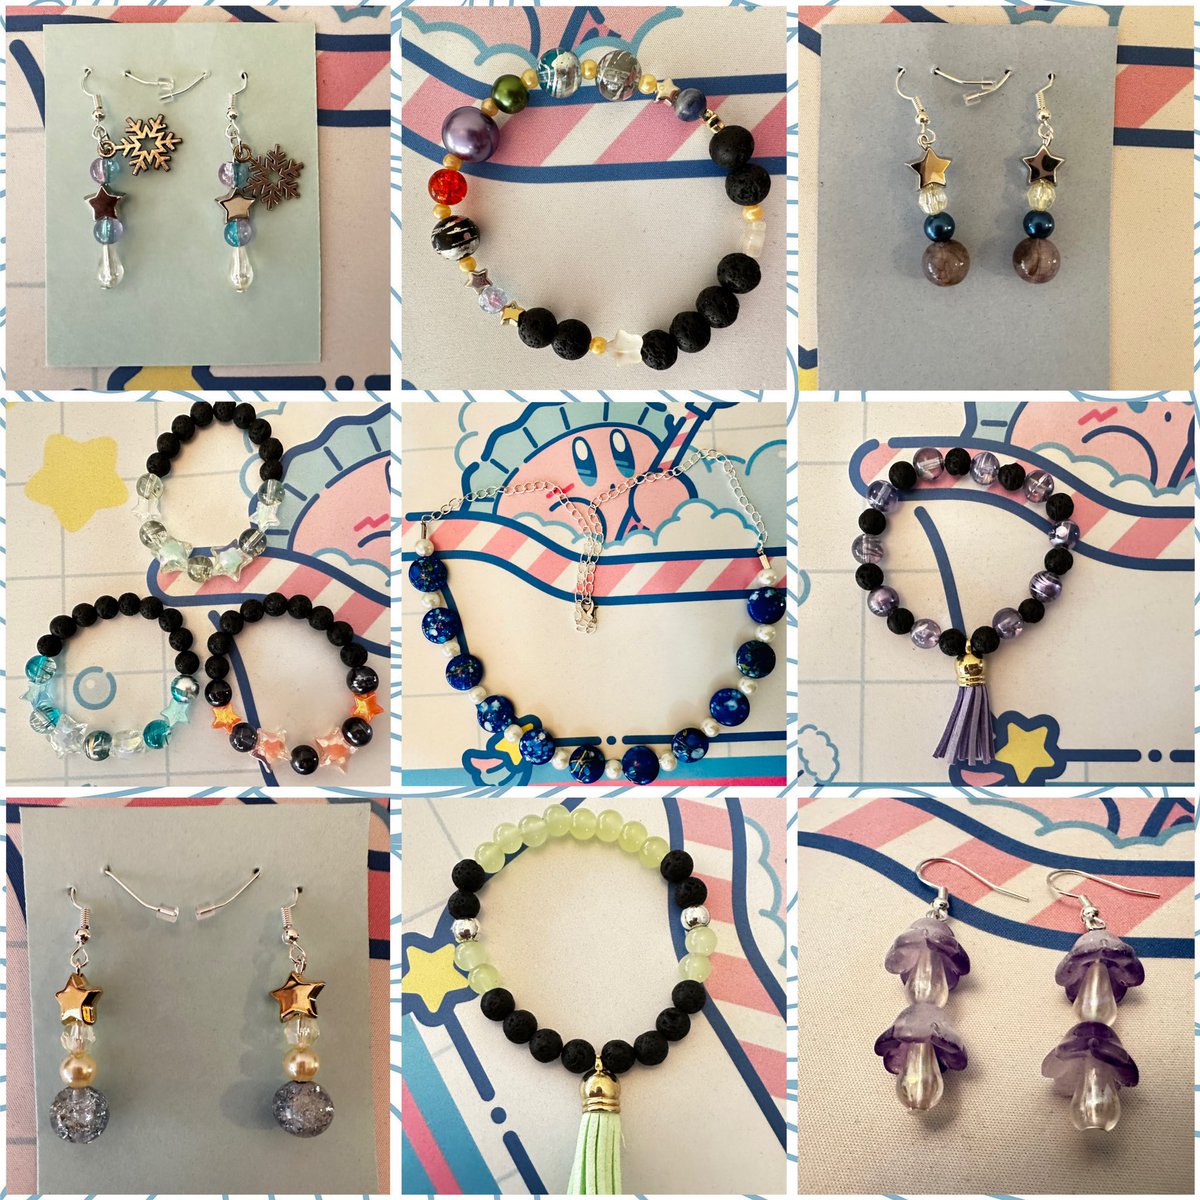 What a nice day ☀️ why not pop on to Etsy and treat yourself 🫵🌸🎁🎀

All these and more are available ⬆️ did I mention it’s free 🆓 uk postage ✉️ until the end of may? 👀

#etsy #handmade #shopsmall #freepostage #freemail #SupportLocal #SmallBusiness 
🫶
alchemistsaccessory.etsy.com